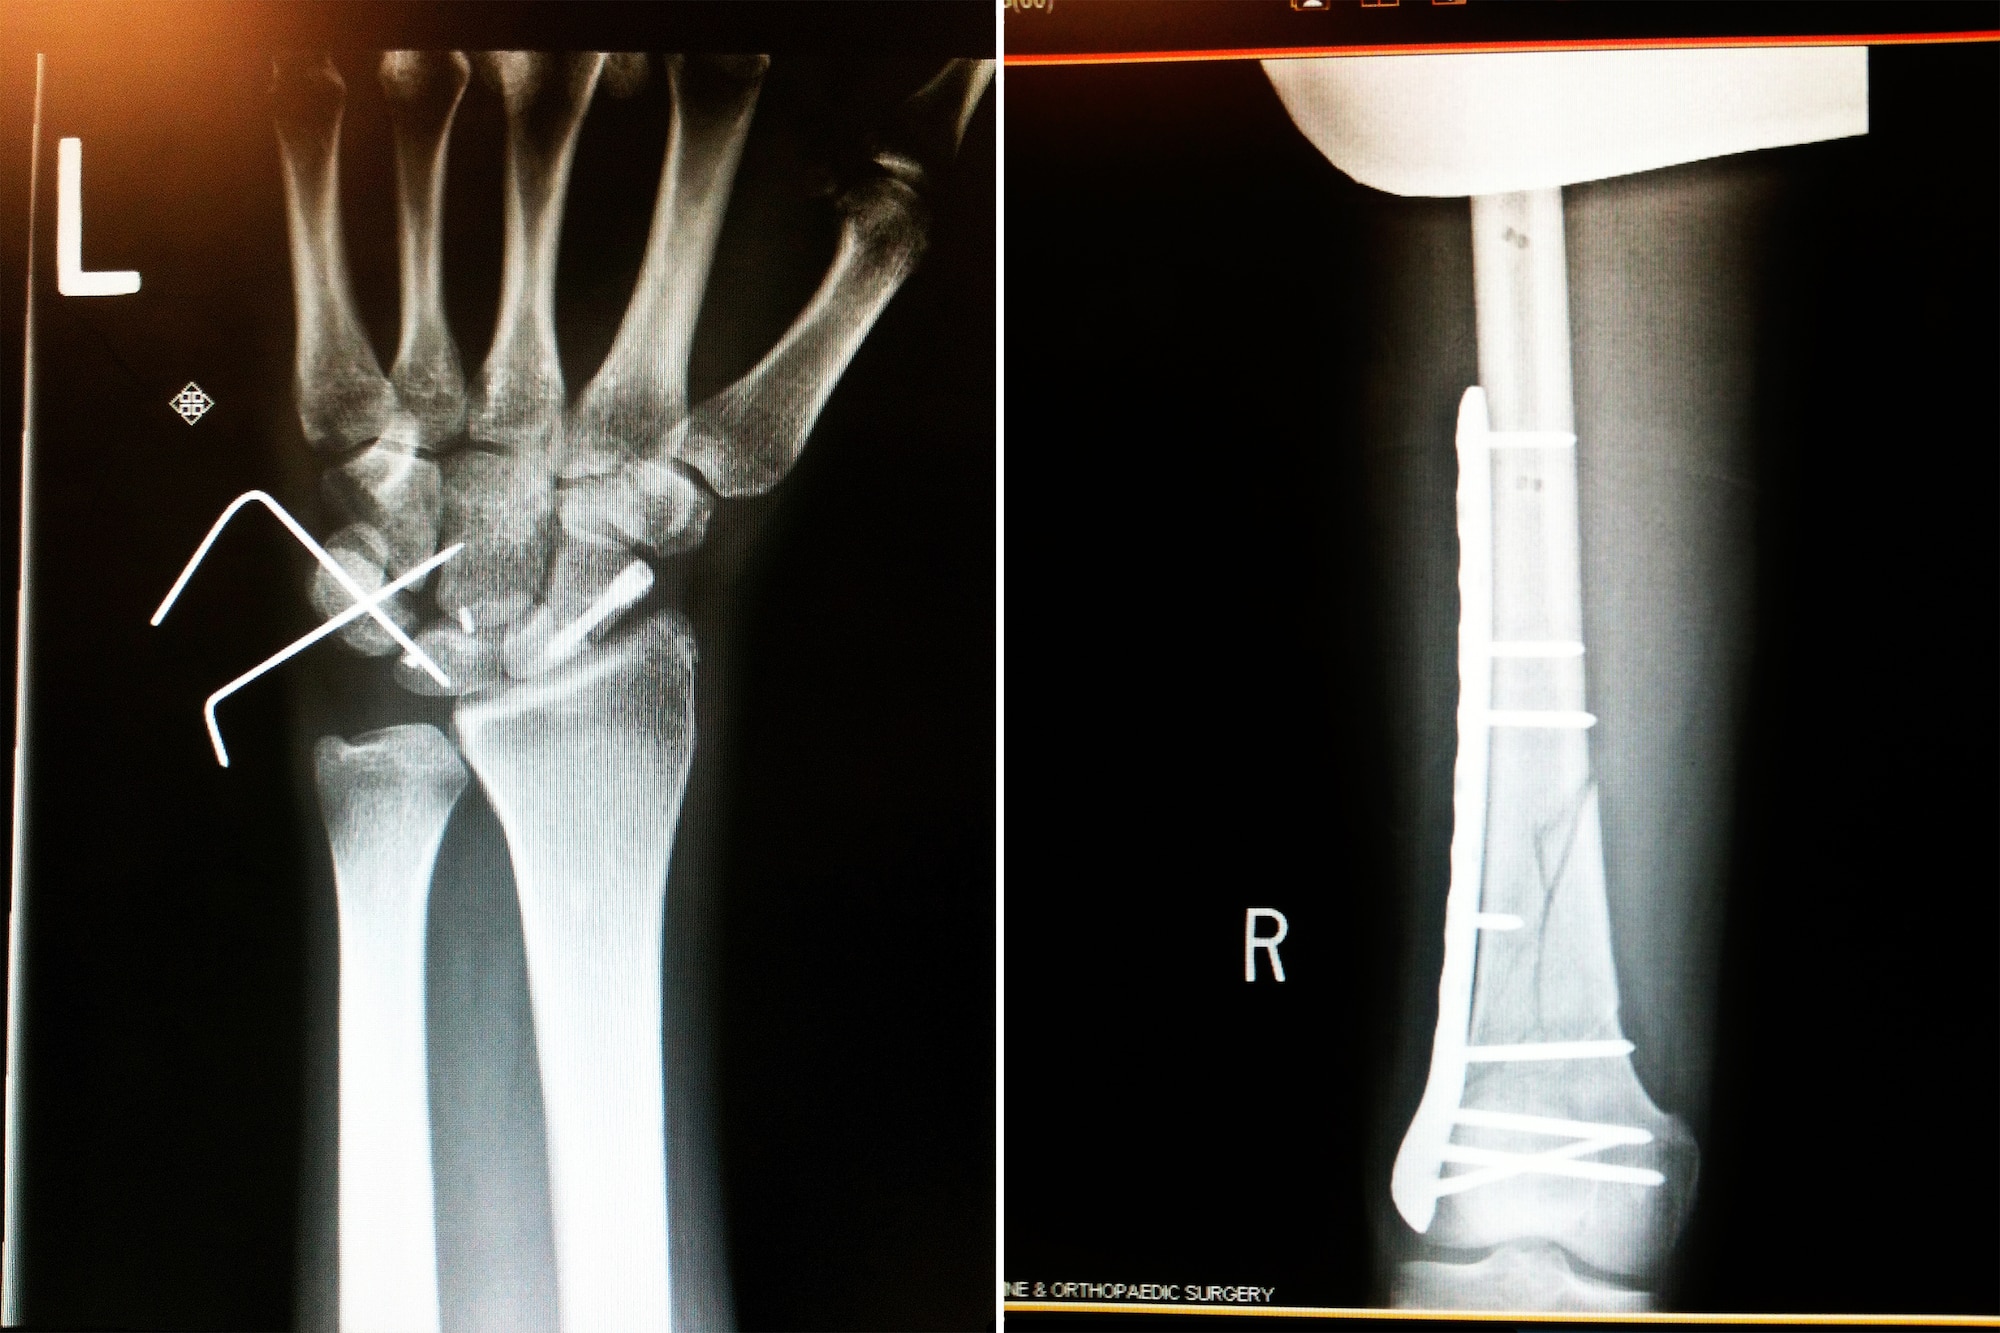 X-rays help tell the tale. Hunter fractured his left wrist, driving the broken bone into his carpal tunnel. His right femur snapped in half, and a metal plate still holds the bone together. (courtesy of Second Lt. Hunter)